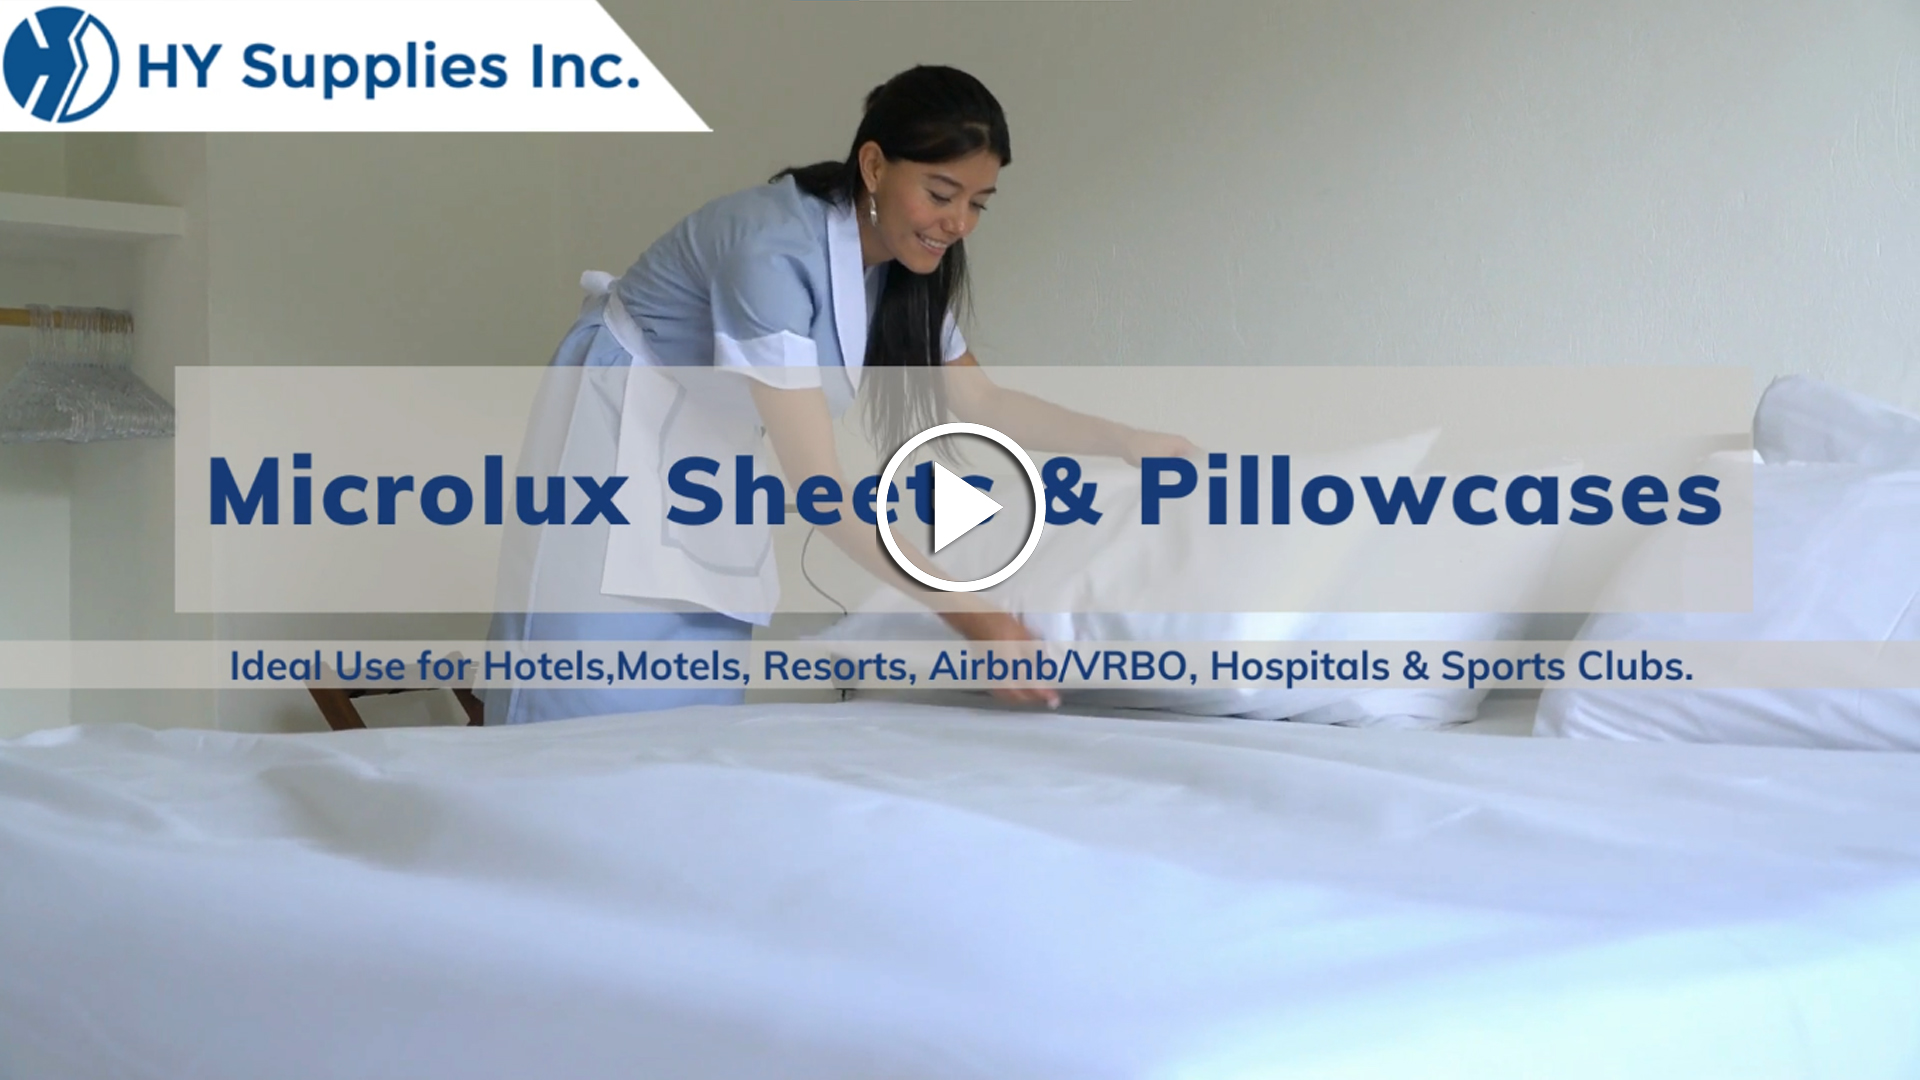 Microlux Sheets & Pillowcases